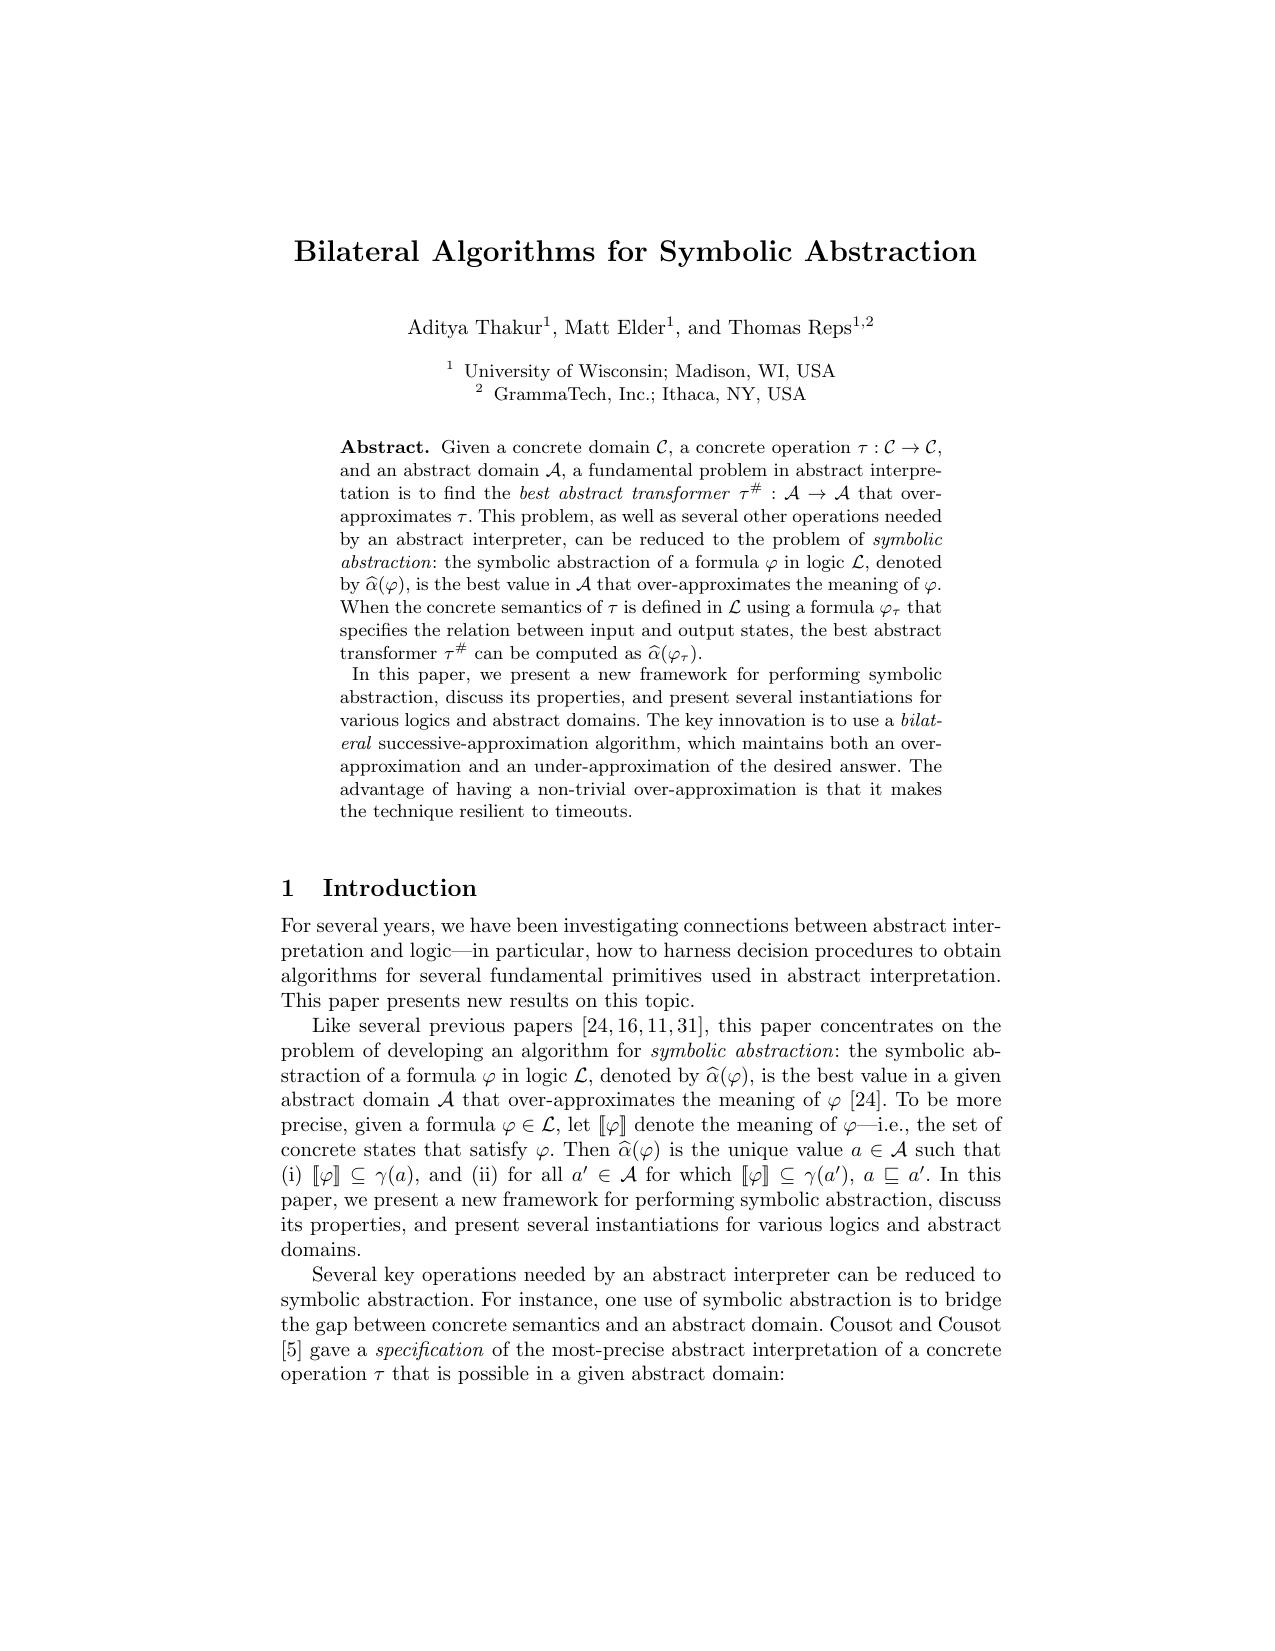 Bilateral Algorithms for Symbolic Abstraction - Paper